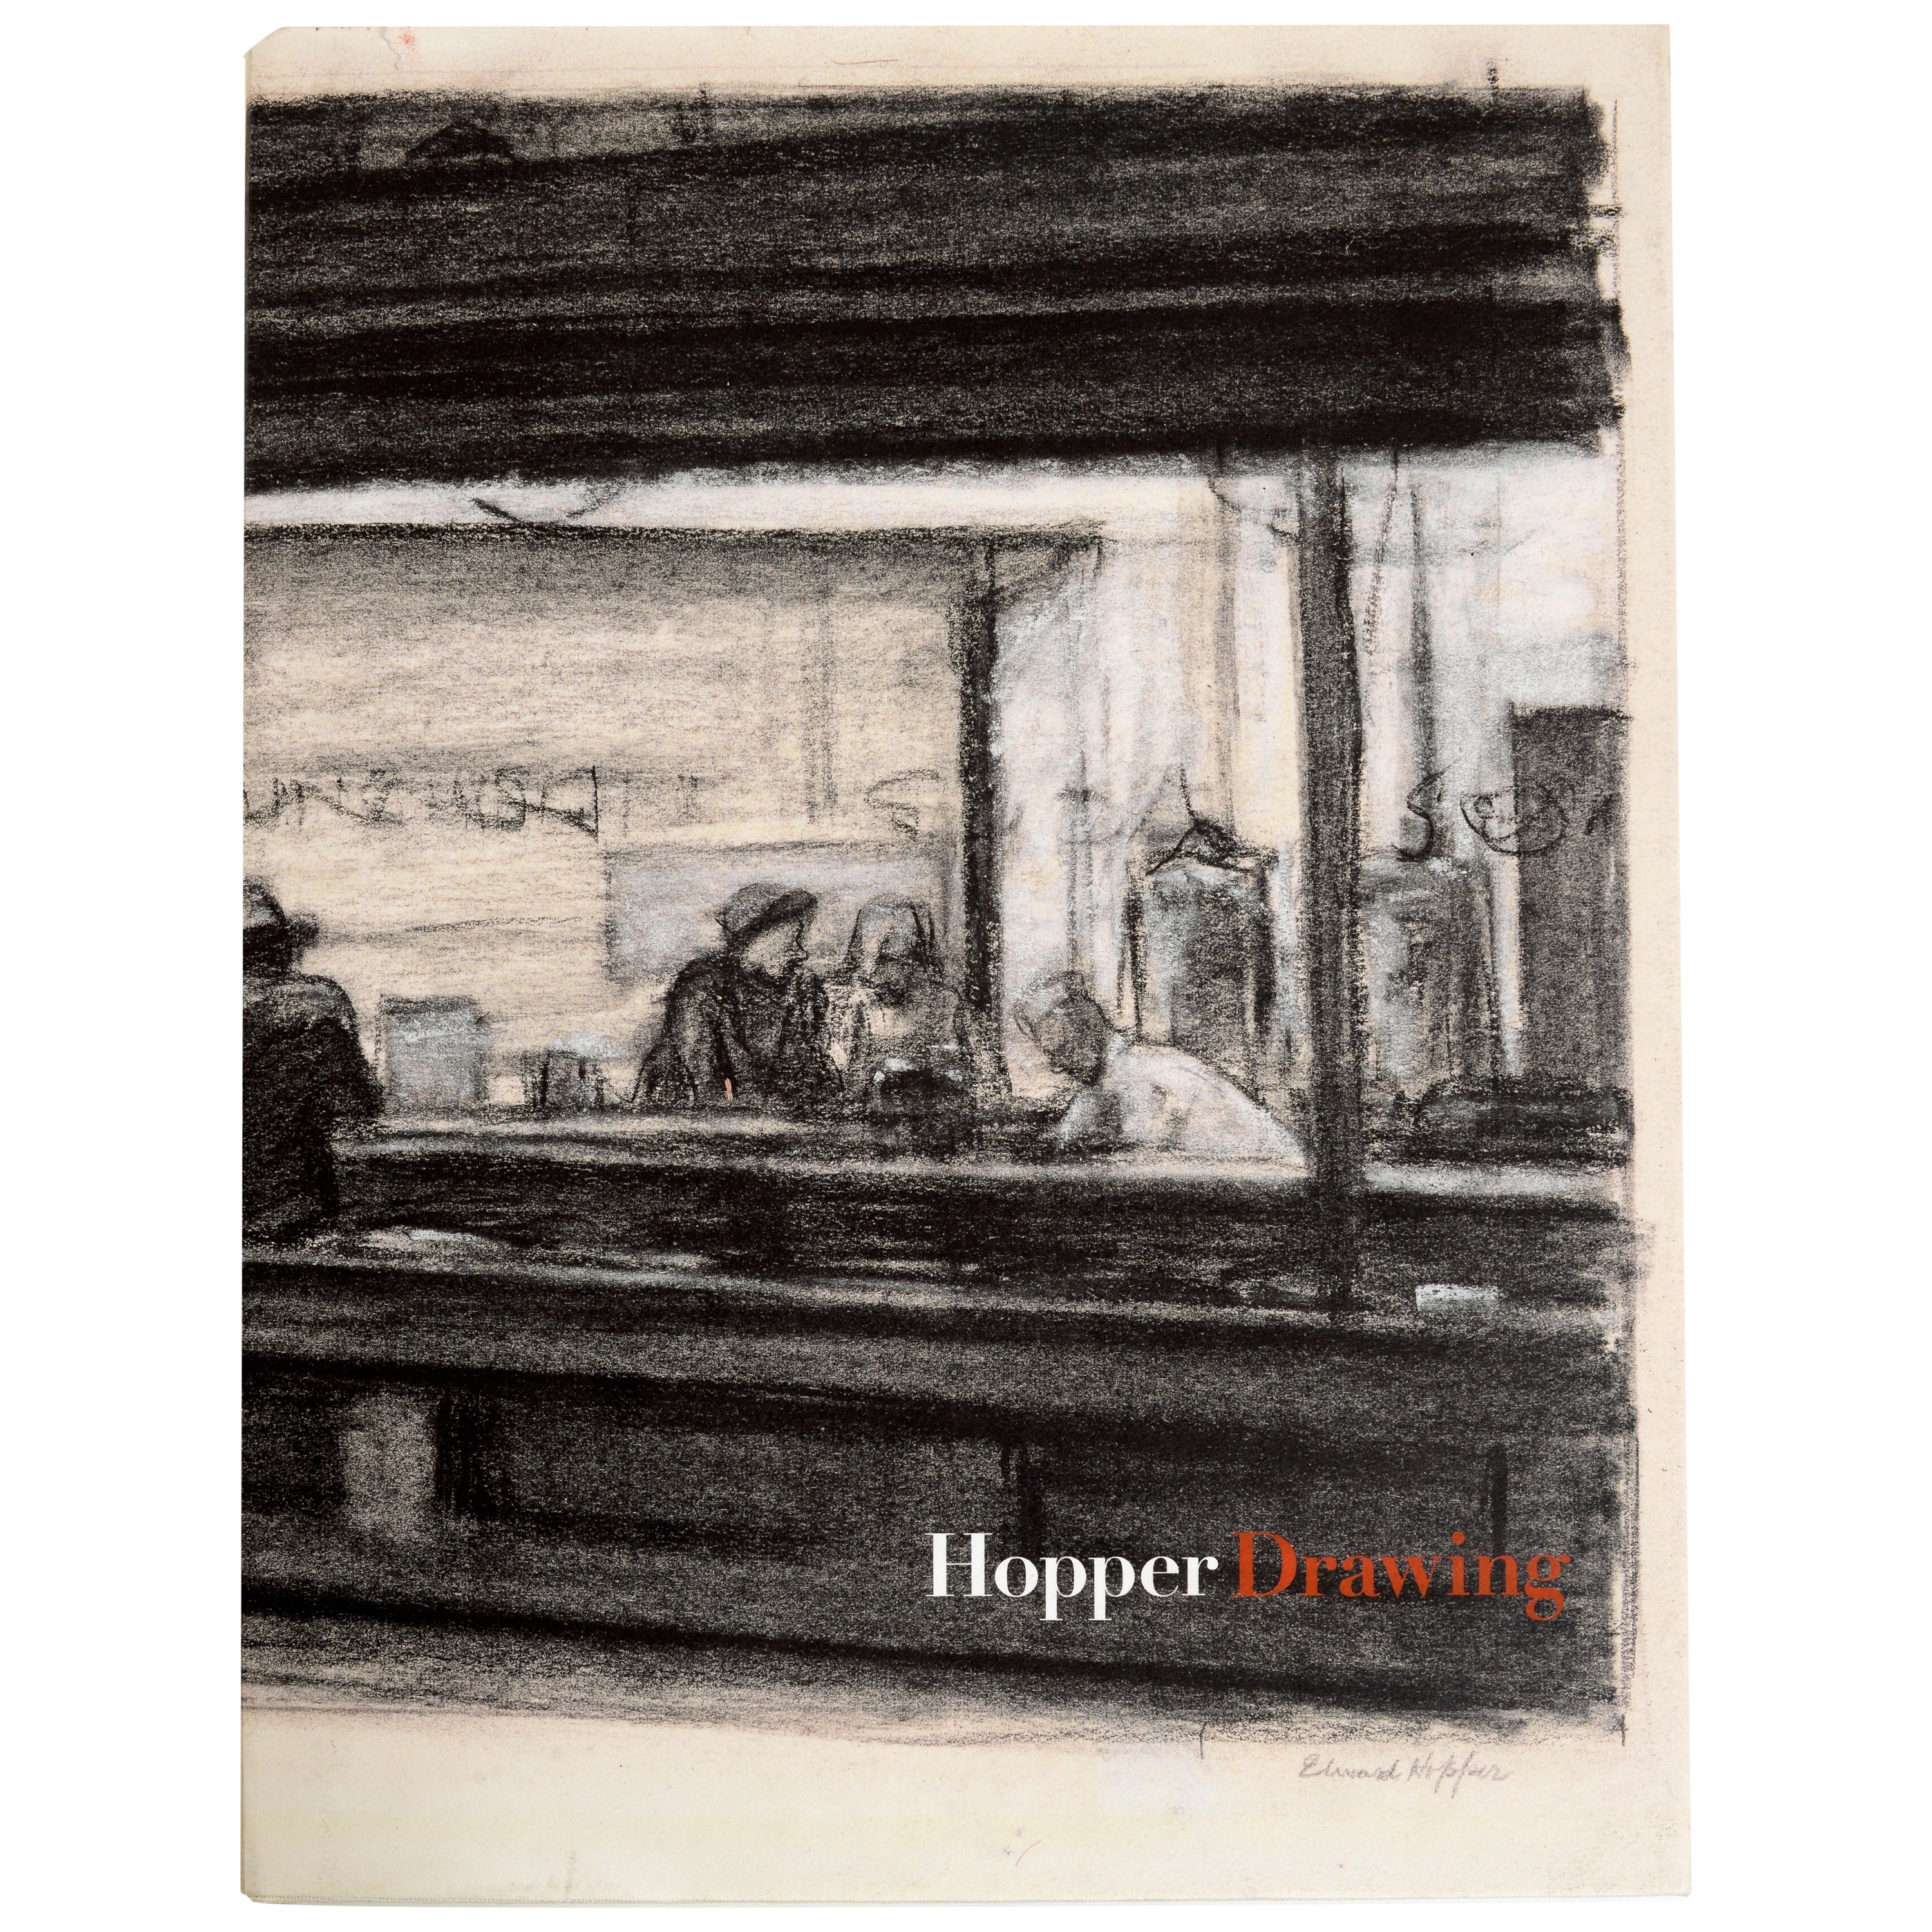 Hopper Drawing by and inscribed by Carter E Foster to Herbert Kasper, 1st Ed For Sale